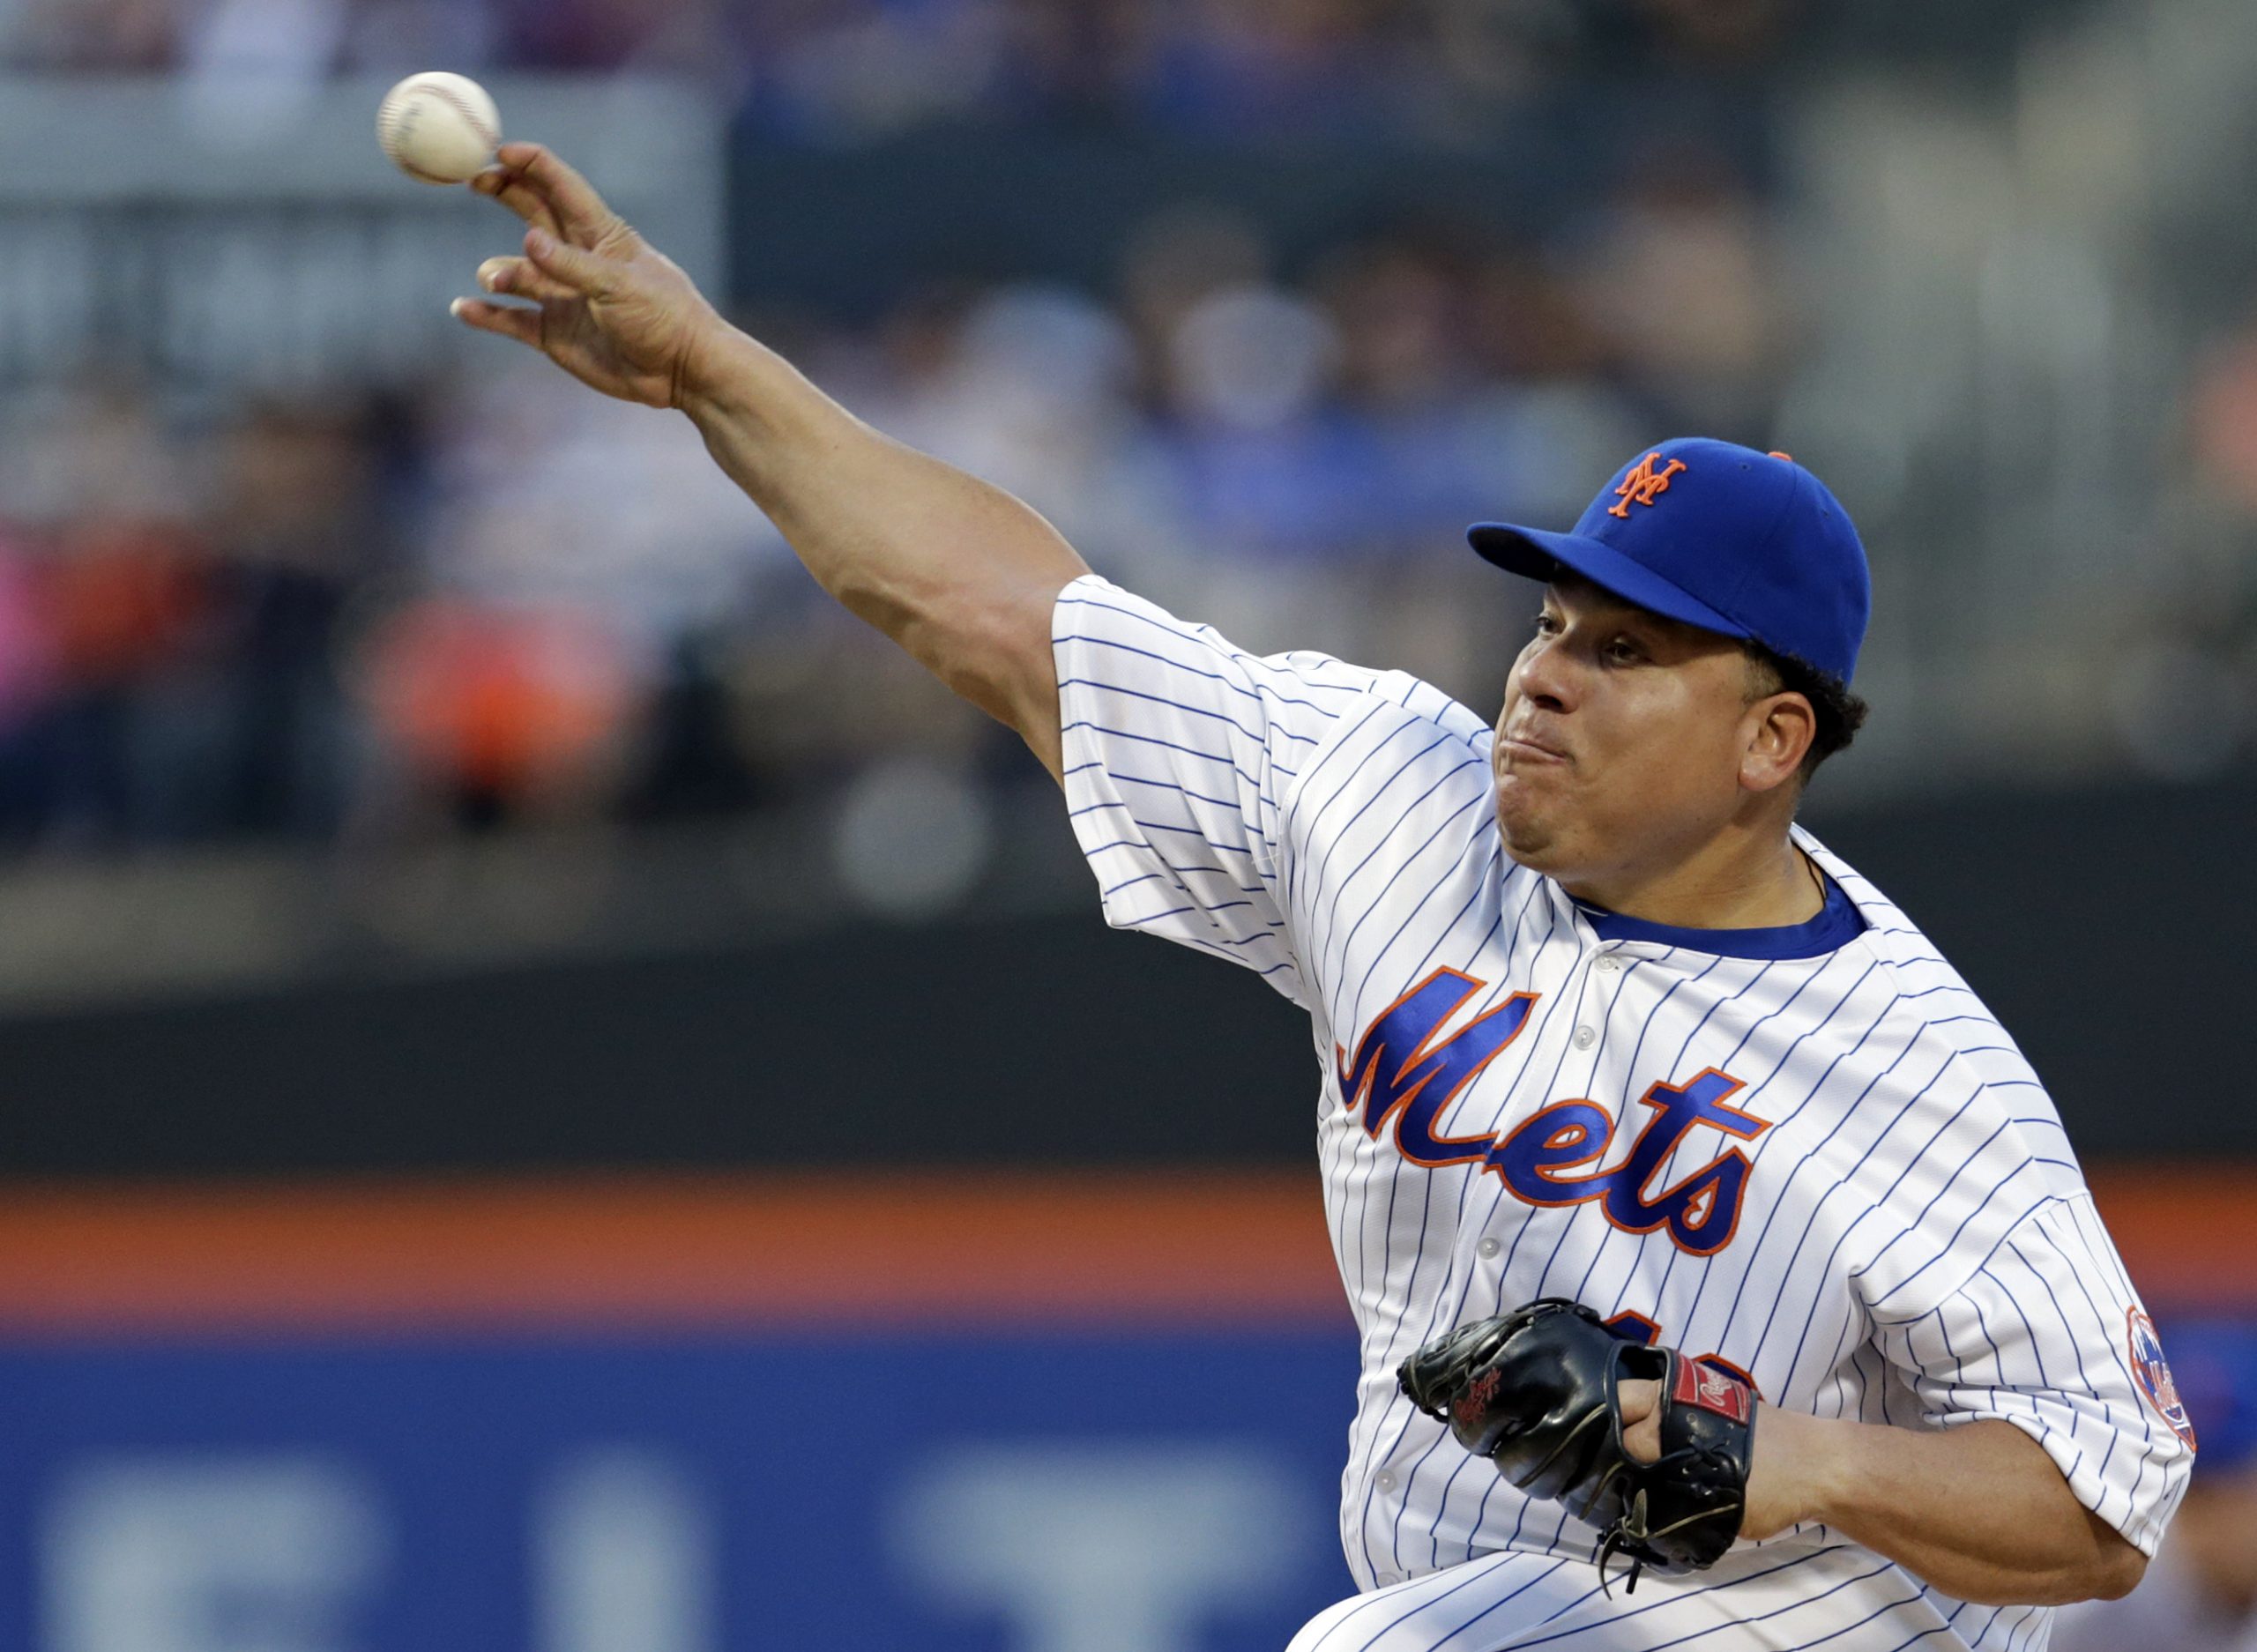 Bartolo Colon will be at Citi Field in 2023, but not to pitch for Mets